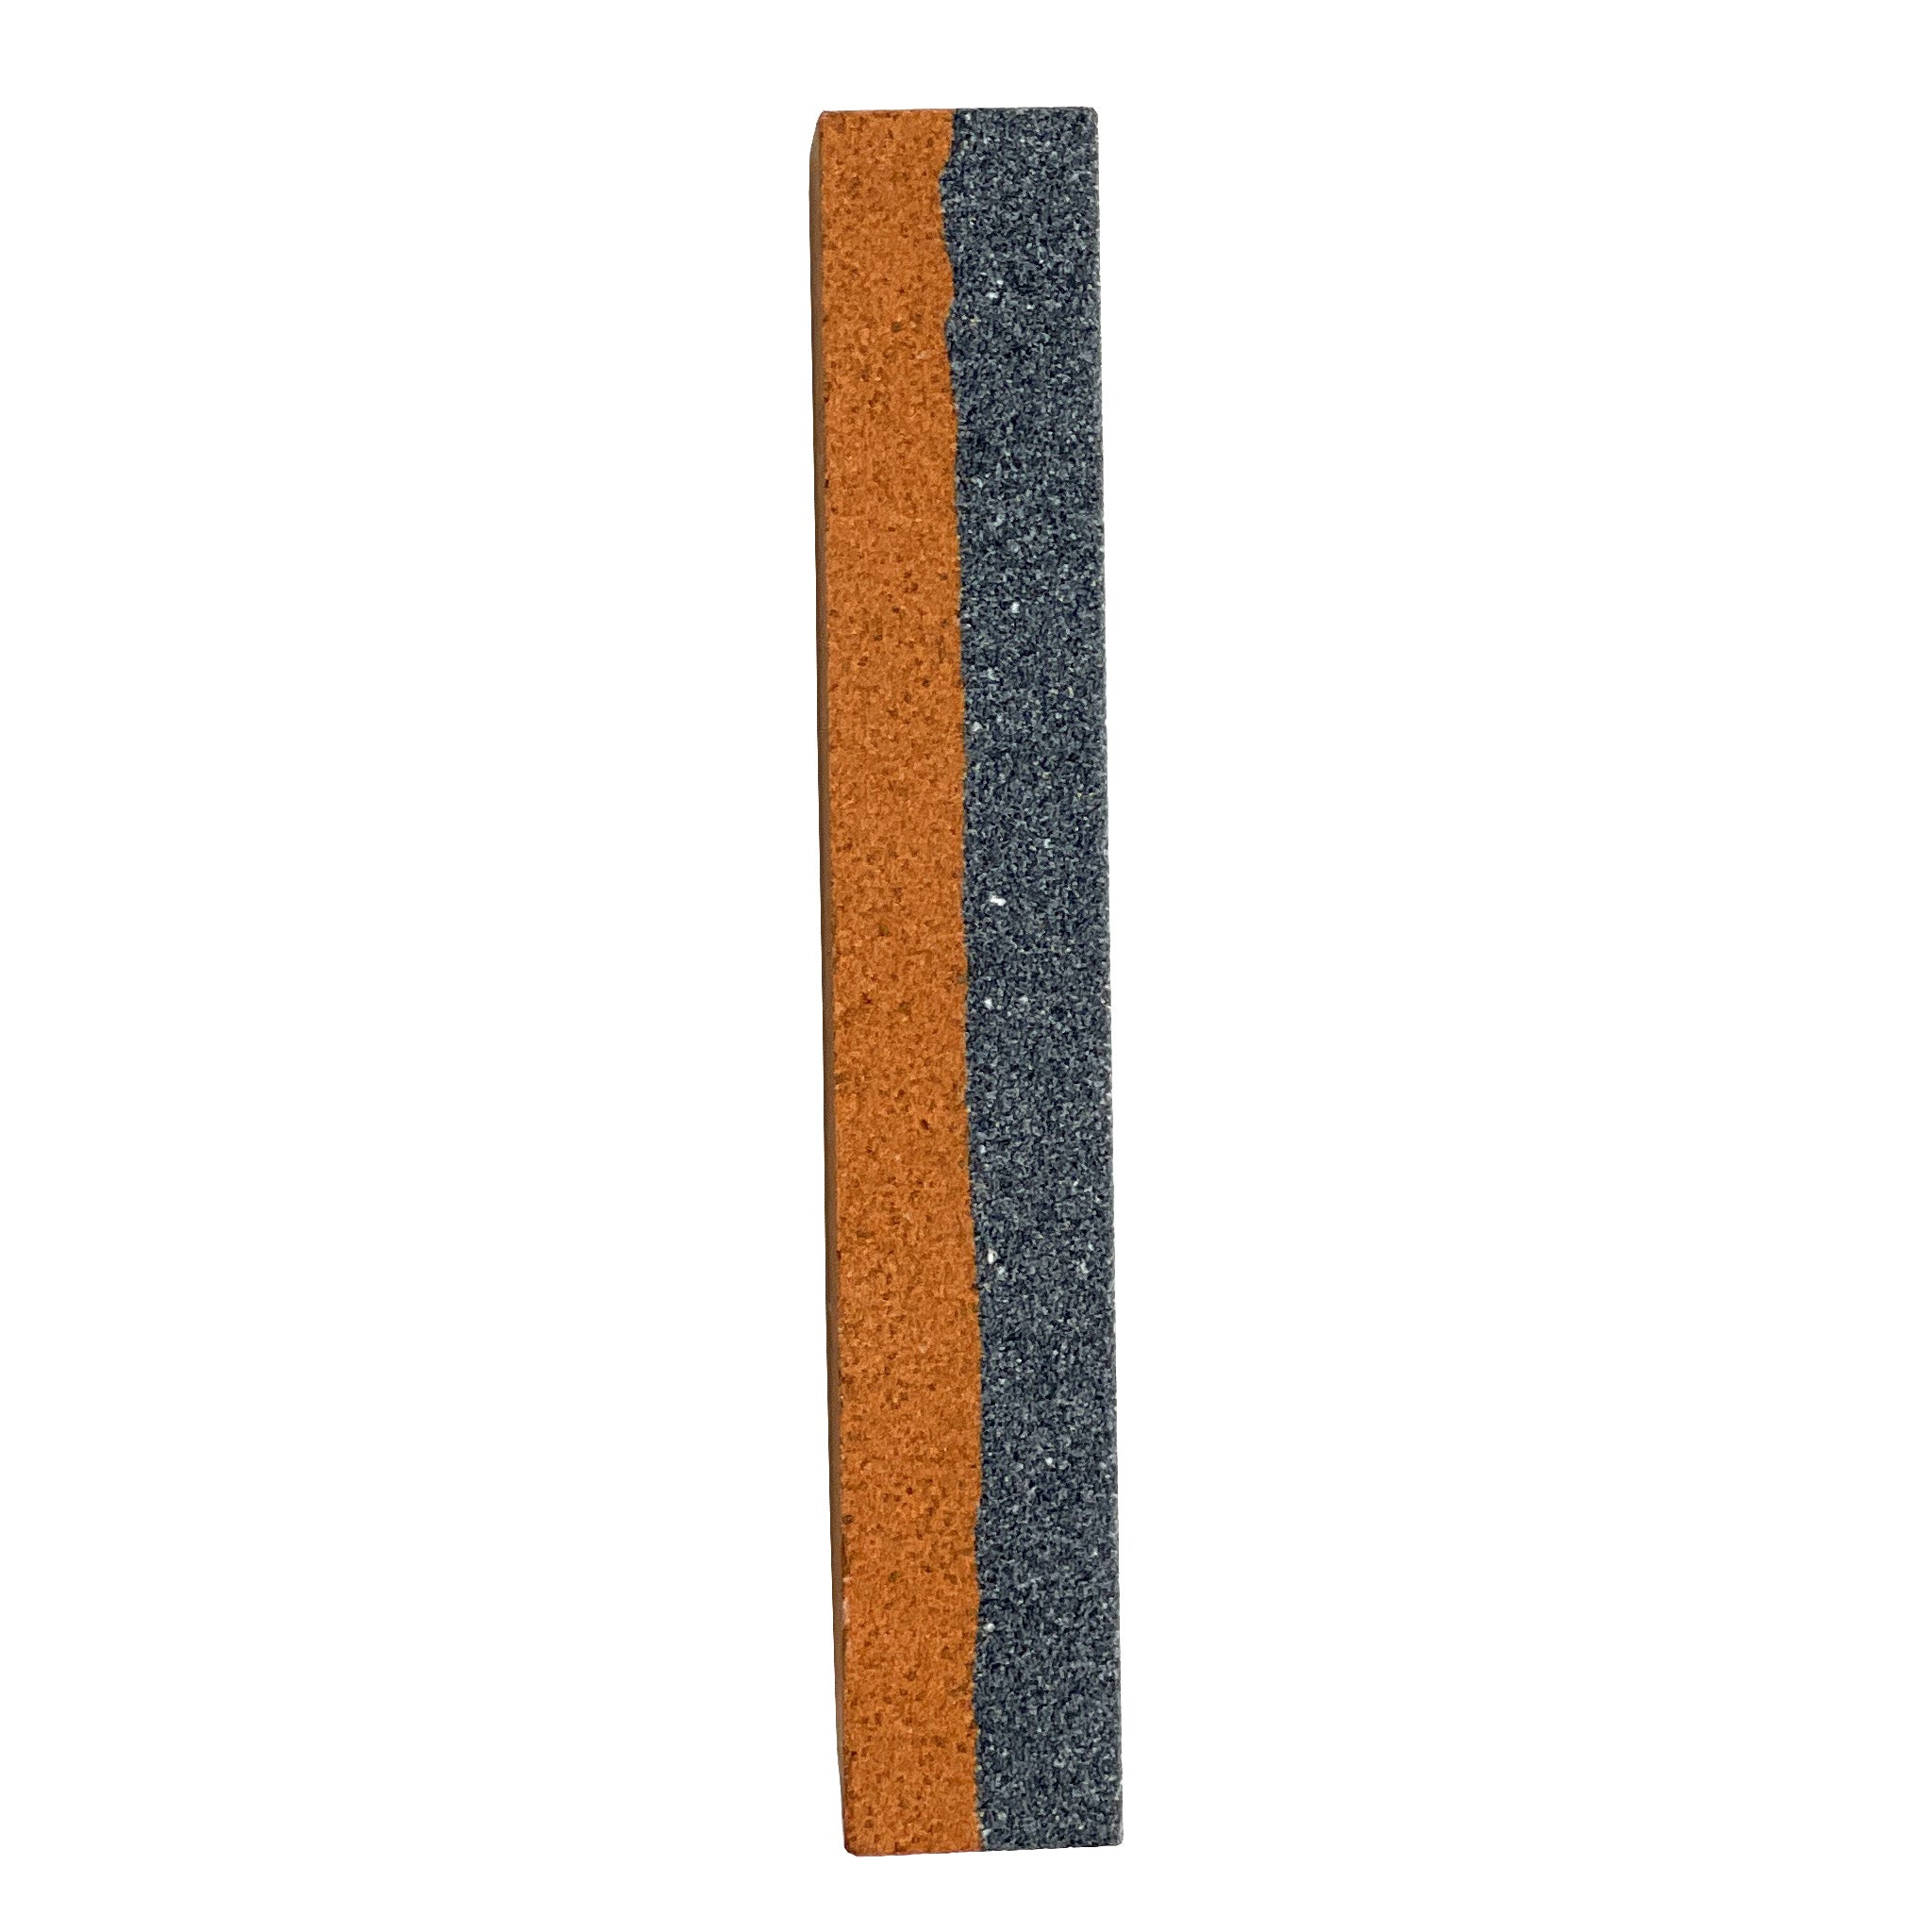 STAGE Double-Sided Pocket Stone for Ski Tuning